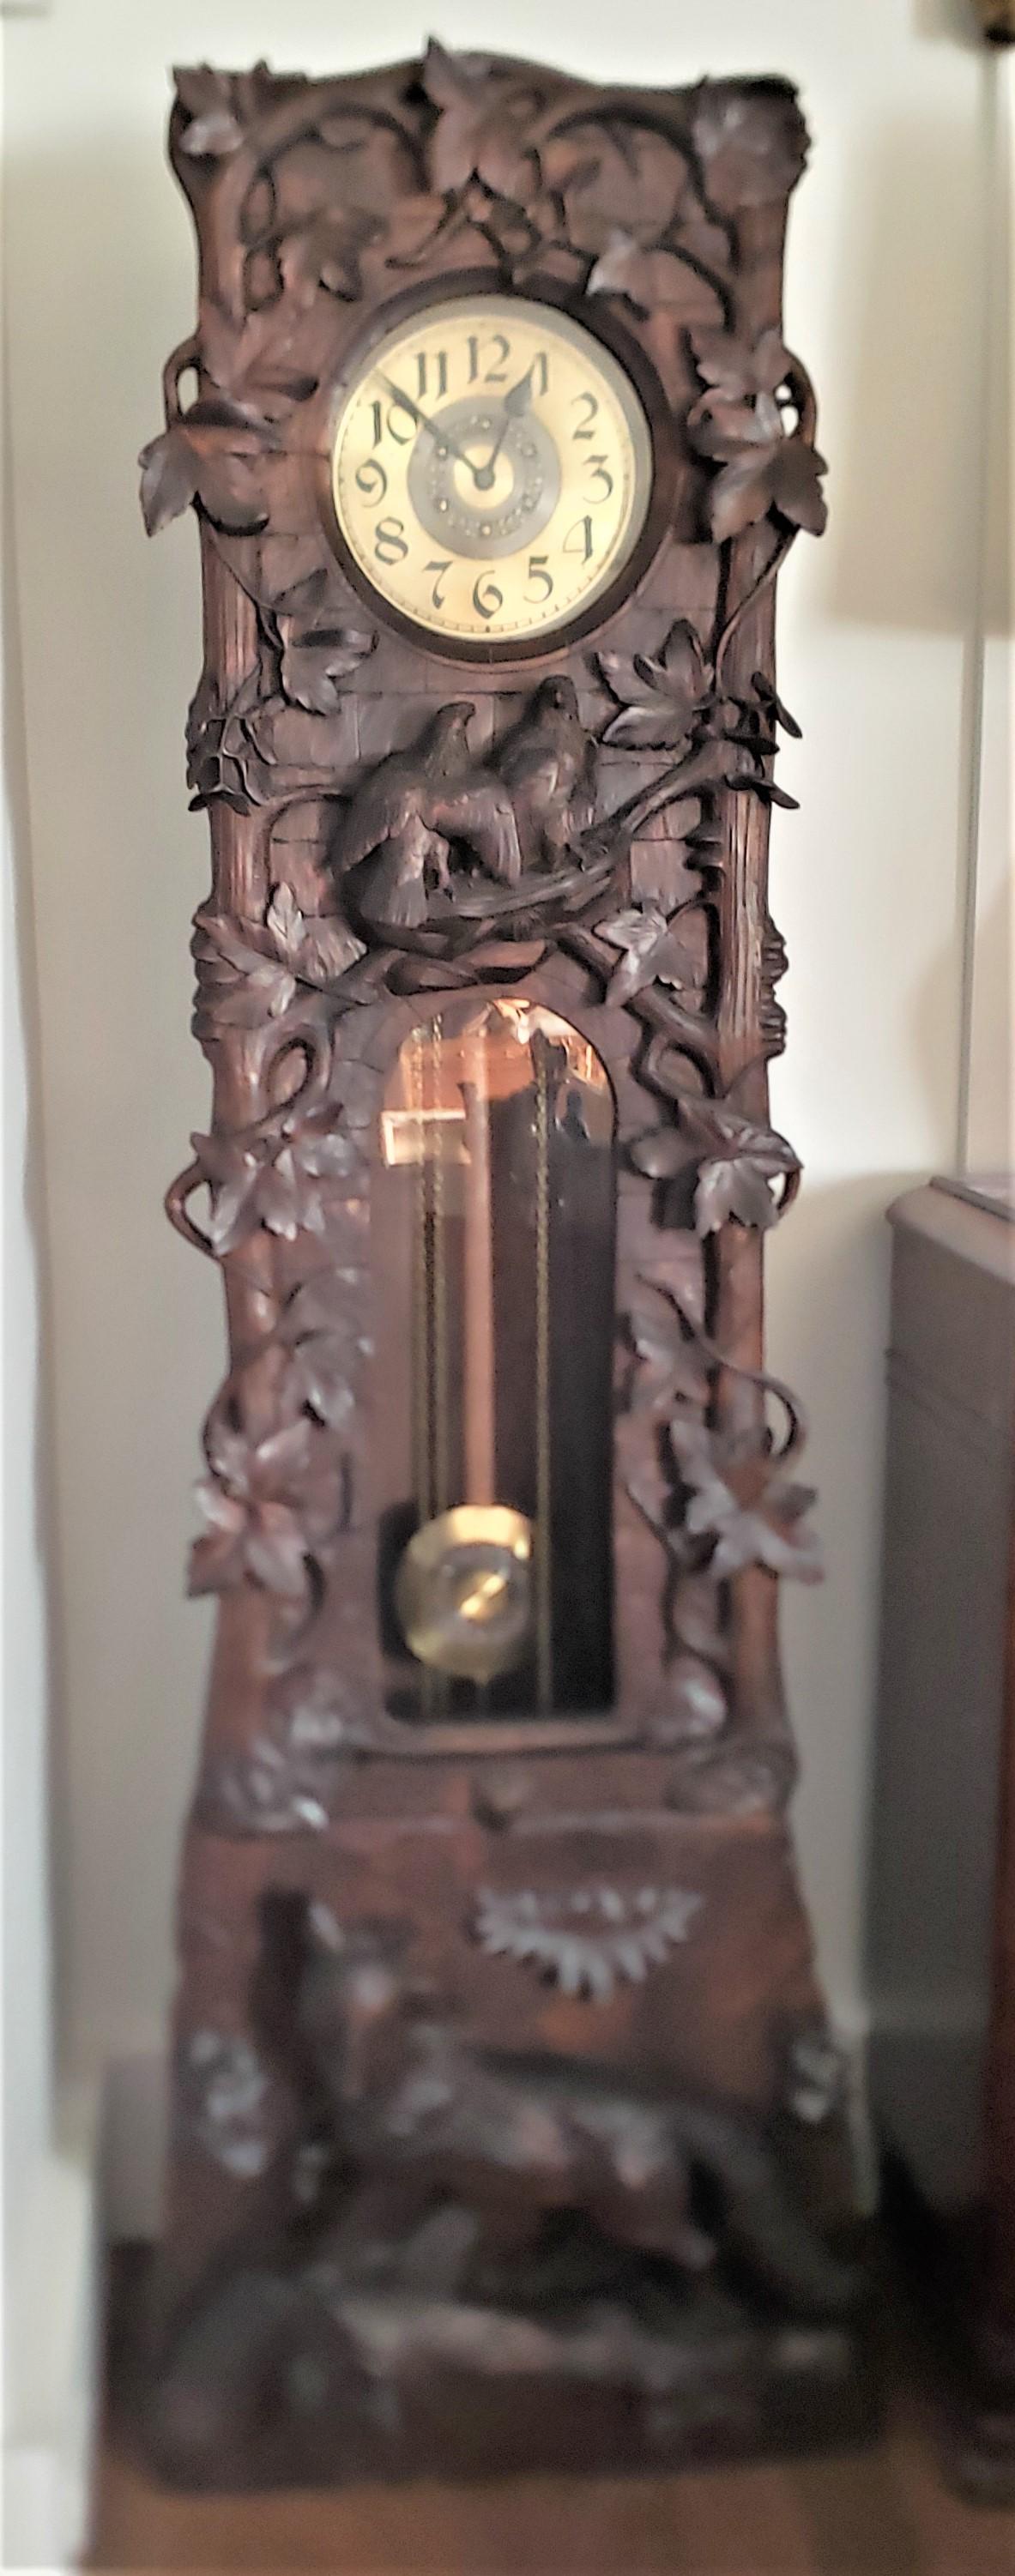 This antique grandfather or longcase clock was done by the renowned Peter Trauffer of Switzerland in approximately 1920 in his signature Black Forest style. The case is composed of walnut which has applied ornately carved leaves along the top of the